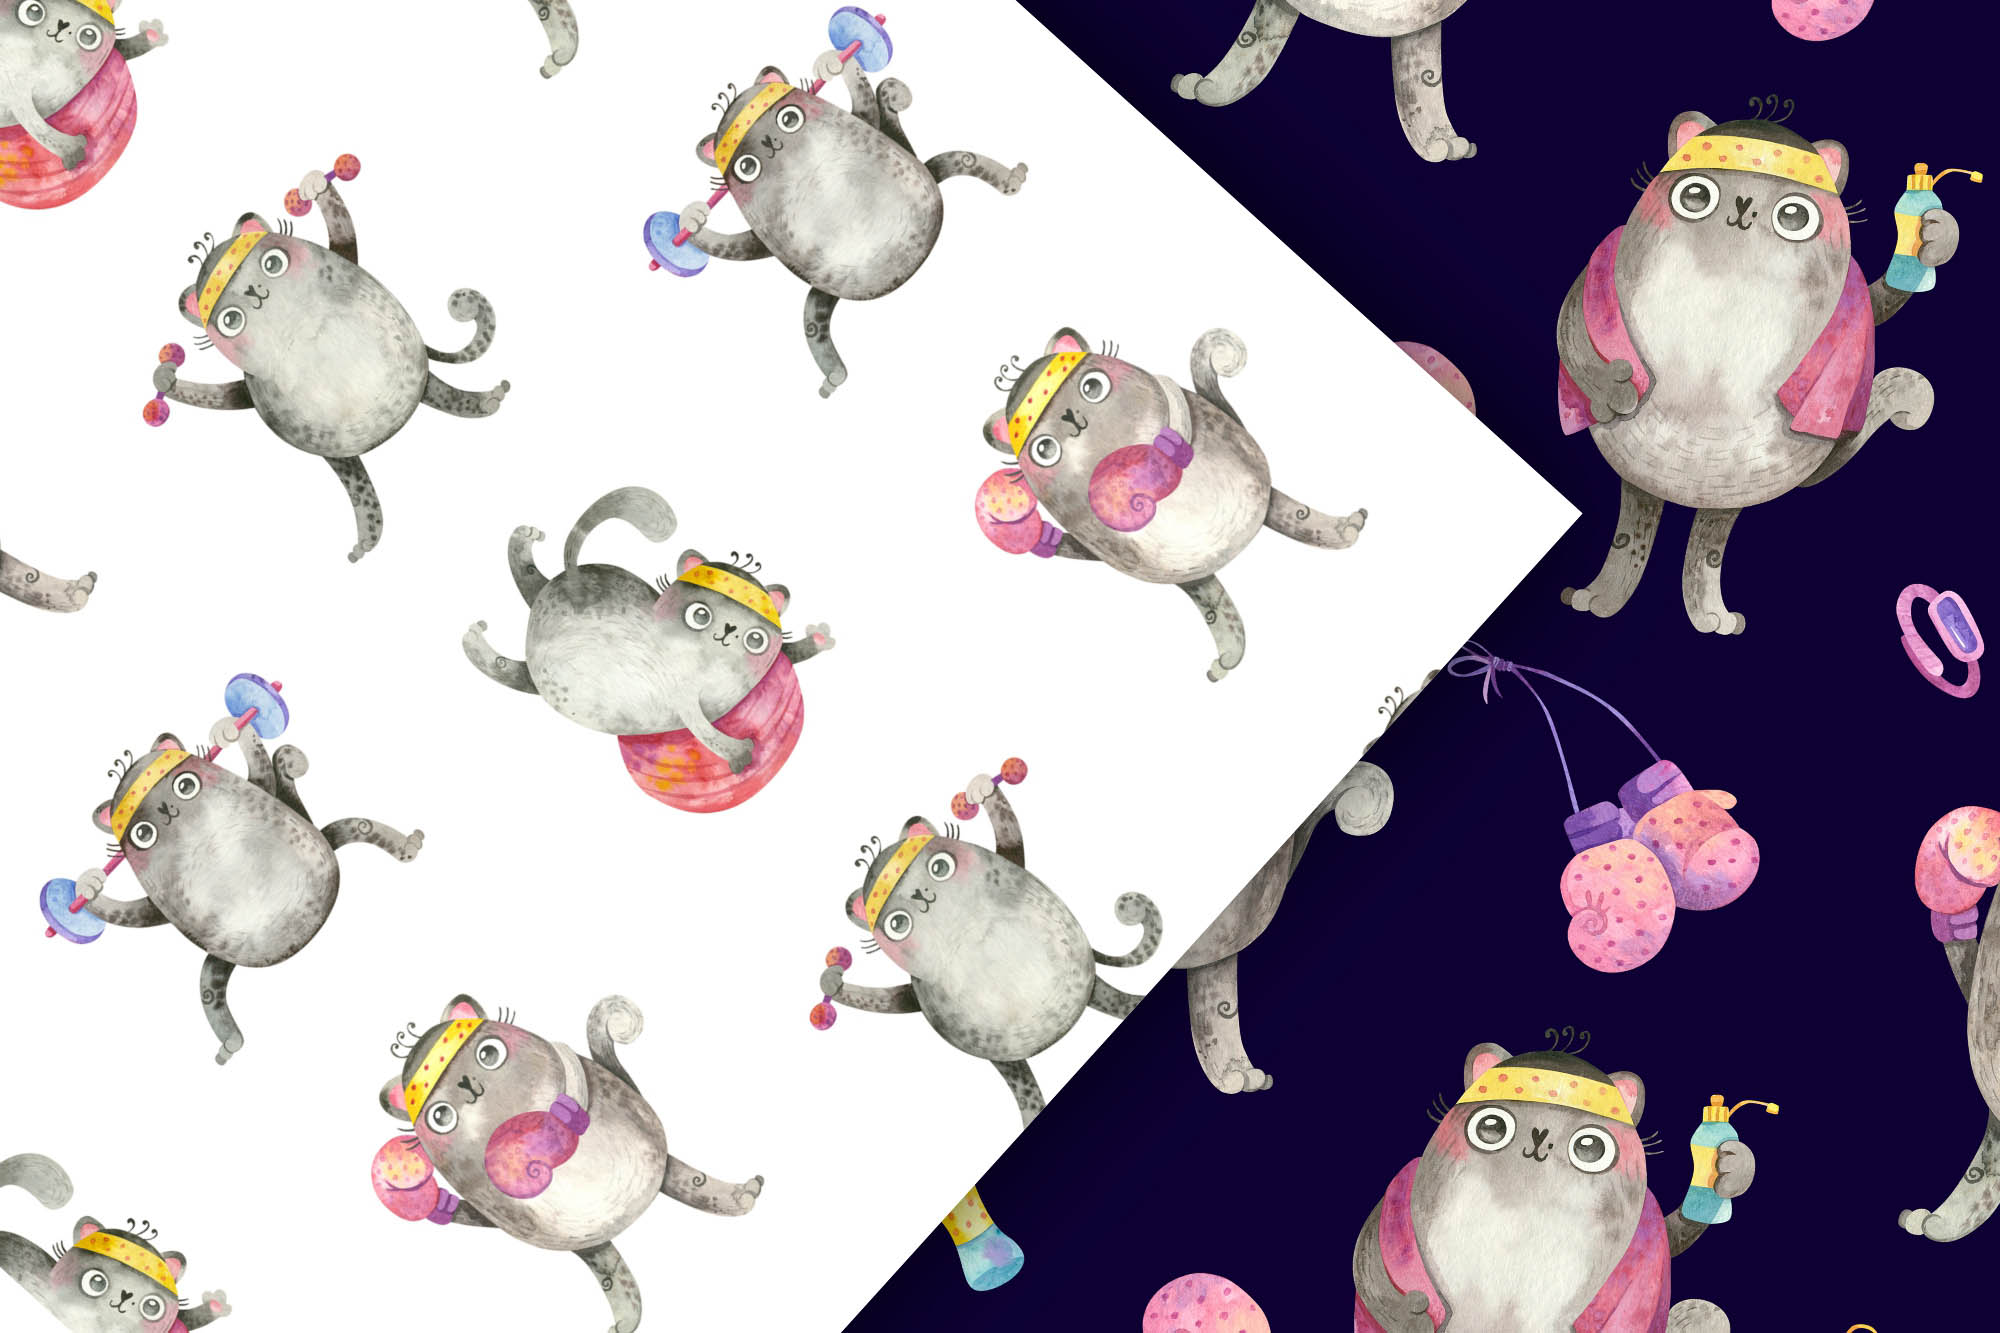  yoda cat patterns for fabric, posters, trackers and more.